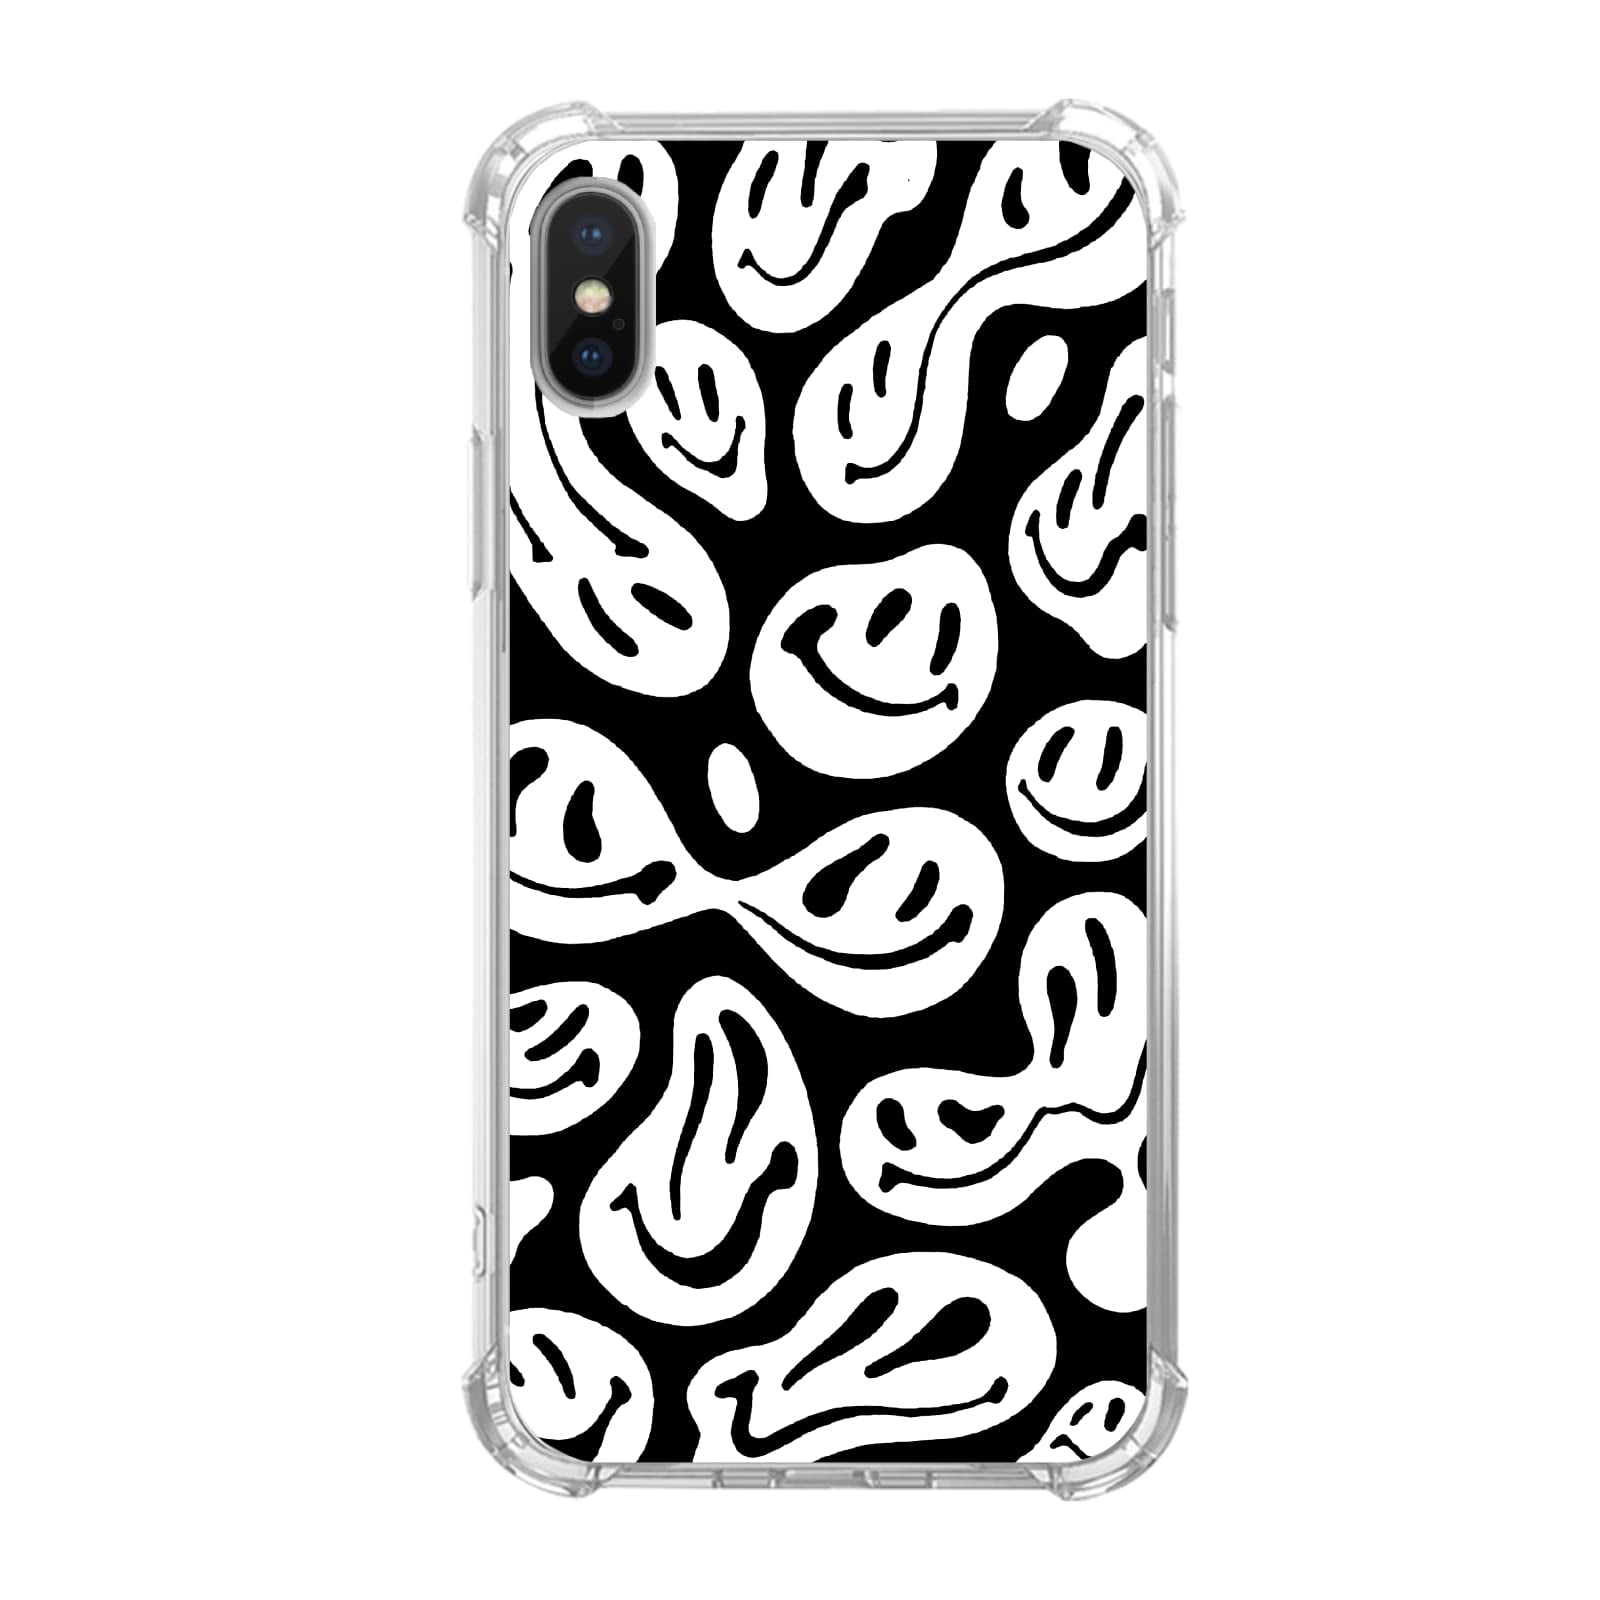 DRIPPING IPHONE XS CASE in black